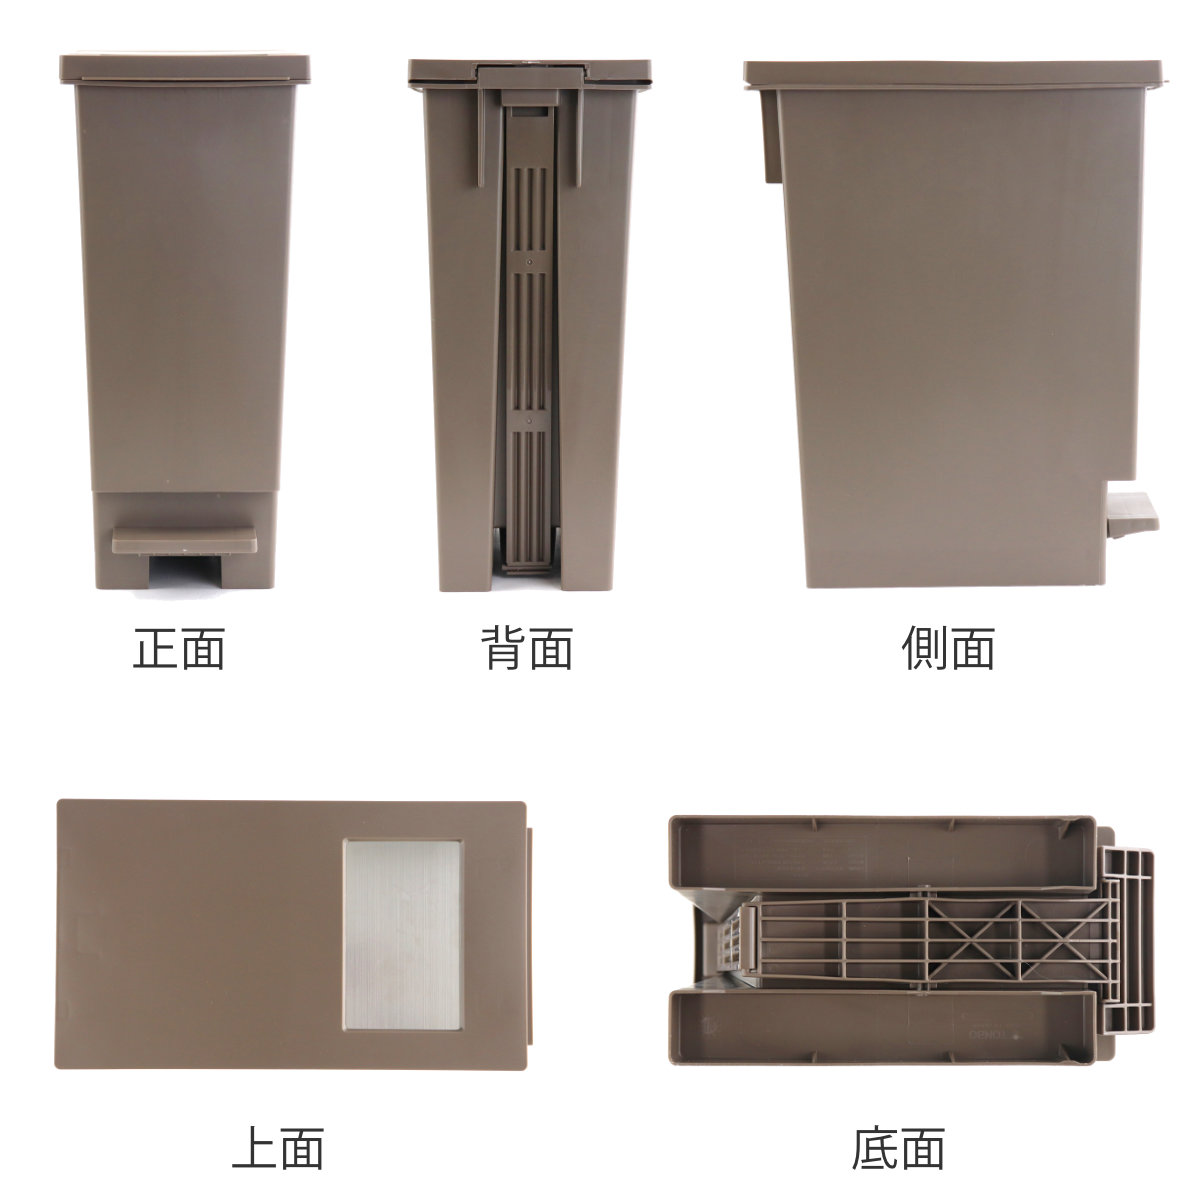  waste basket 30Lyu need push & pedal ( 30 liter cover attaching minute another kitchen dumpster slim minute another waste basket shelves under counter under )